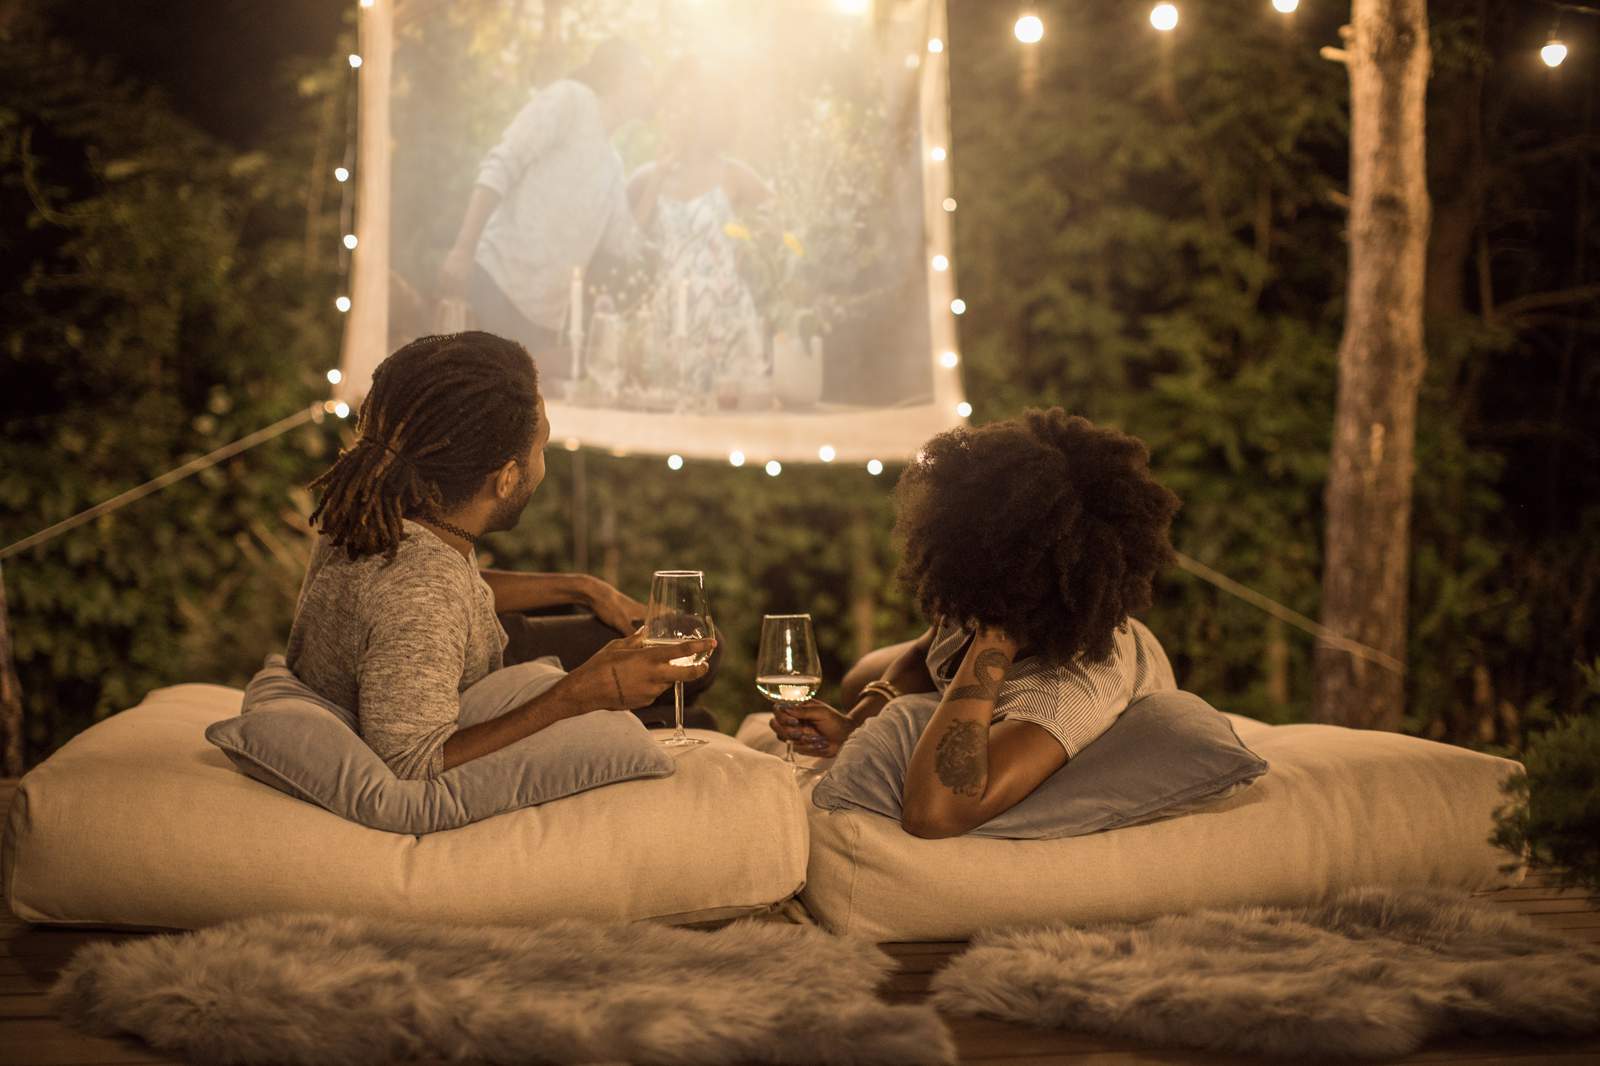 5 ways to create a unique at-home date night in Houston